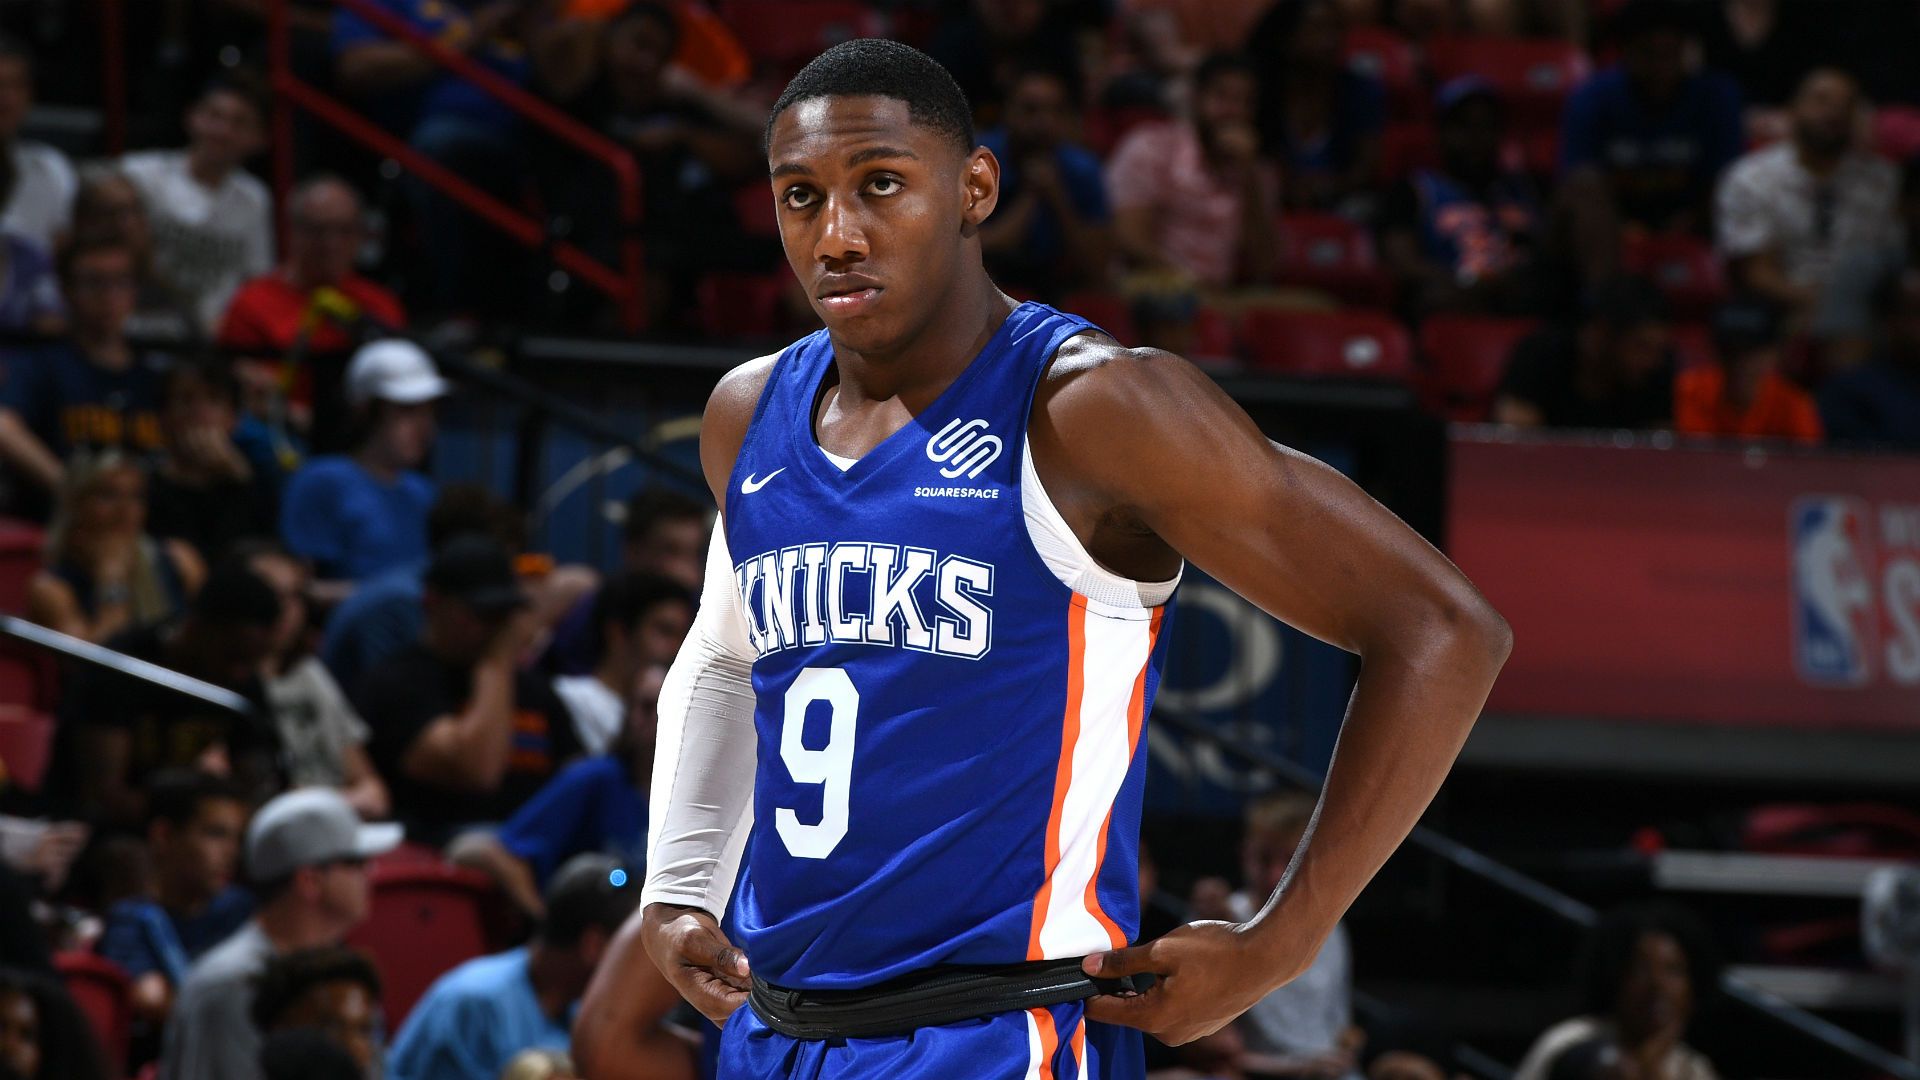 NBA Summer League 2019: Inside RJ Barrett's early struggles for the New York Knicks. NBA.com Canada. The official site of